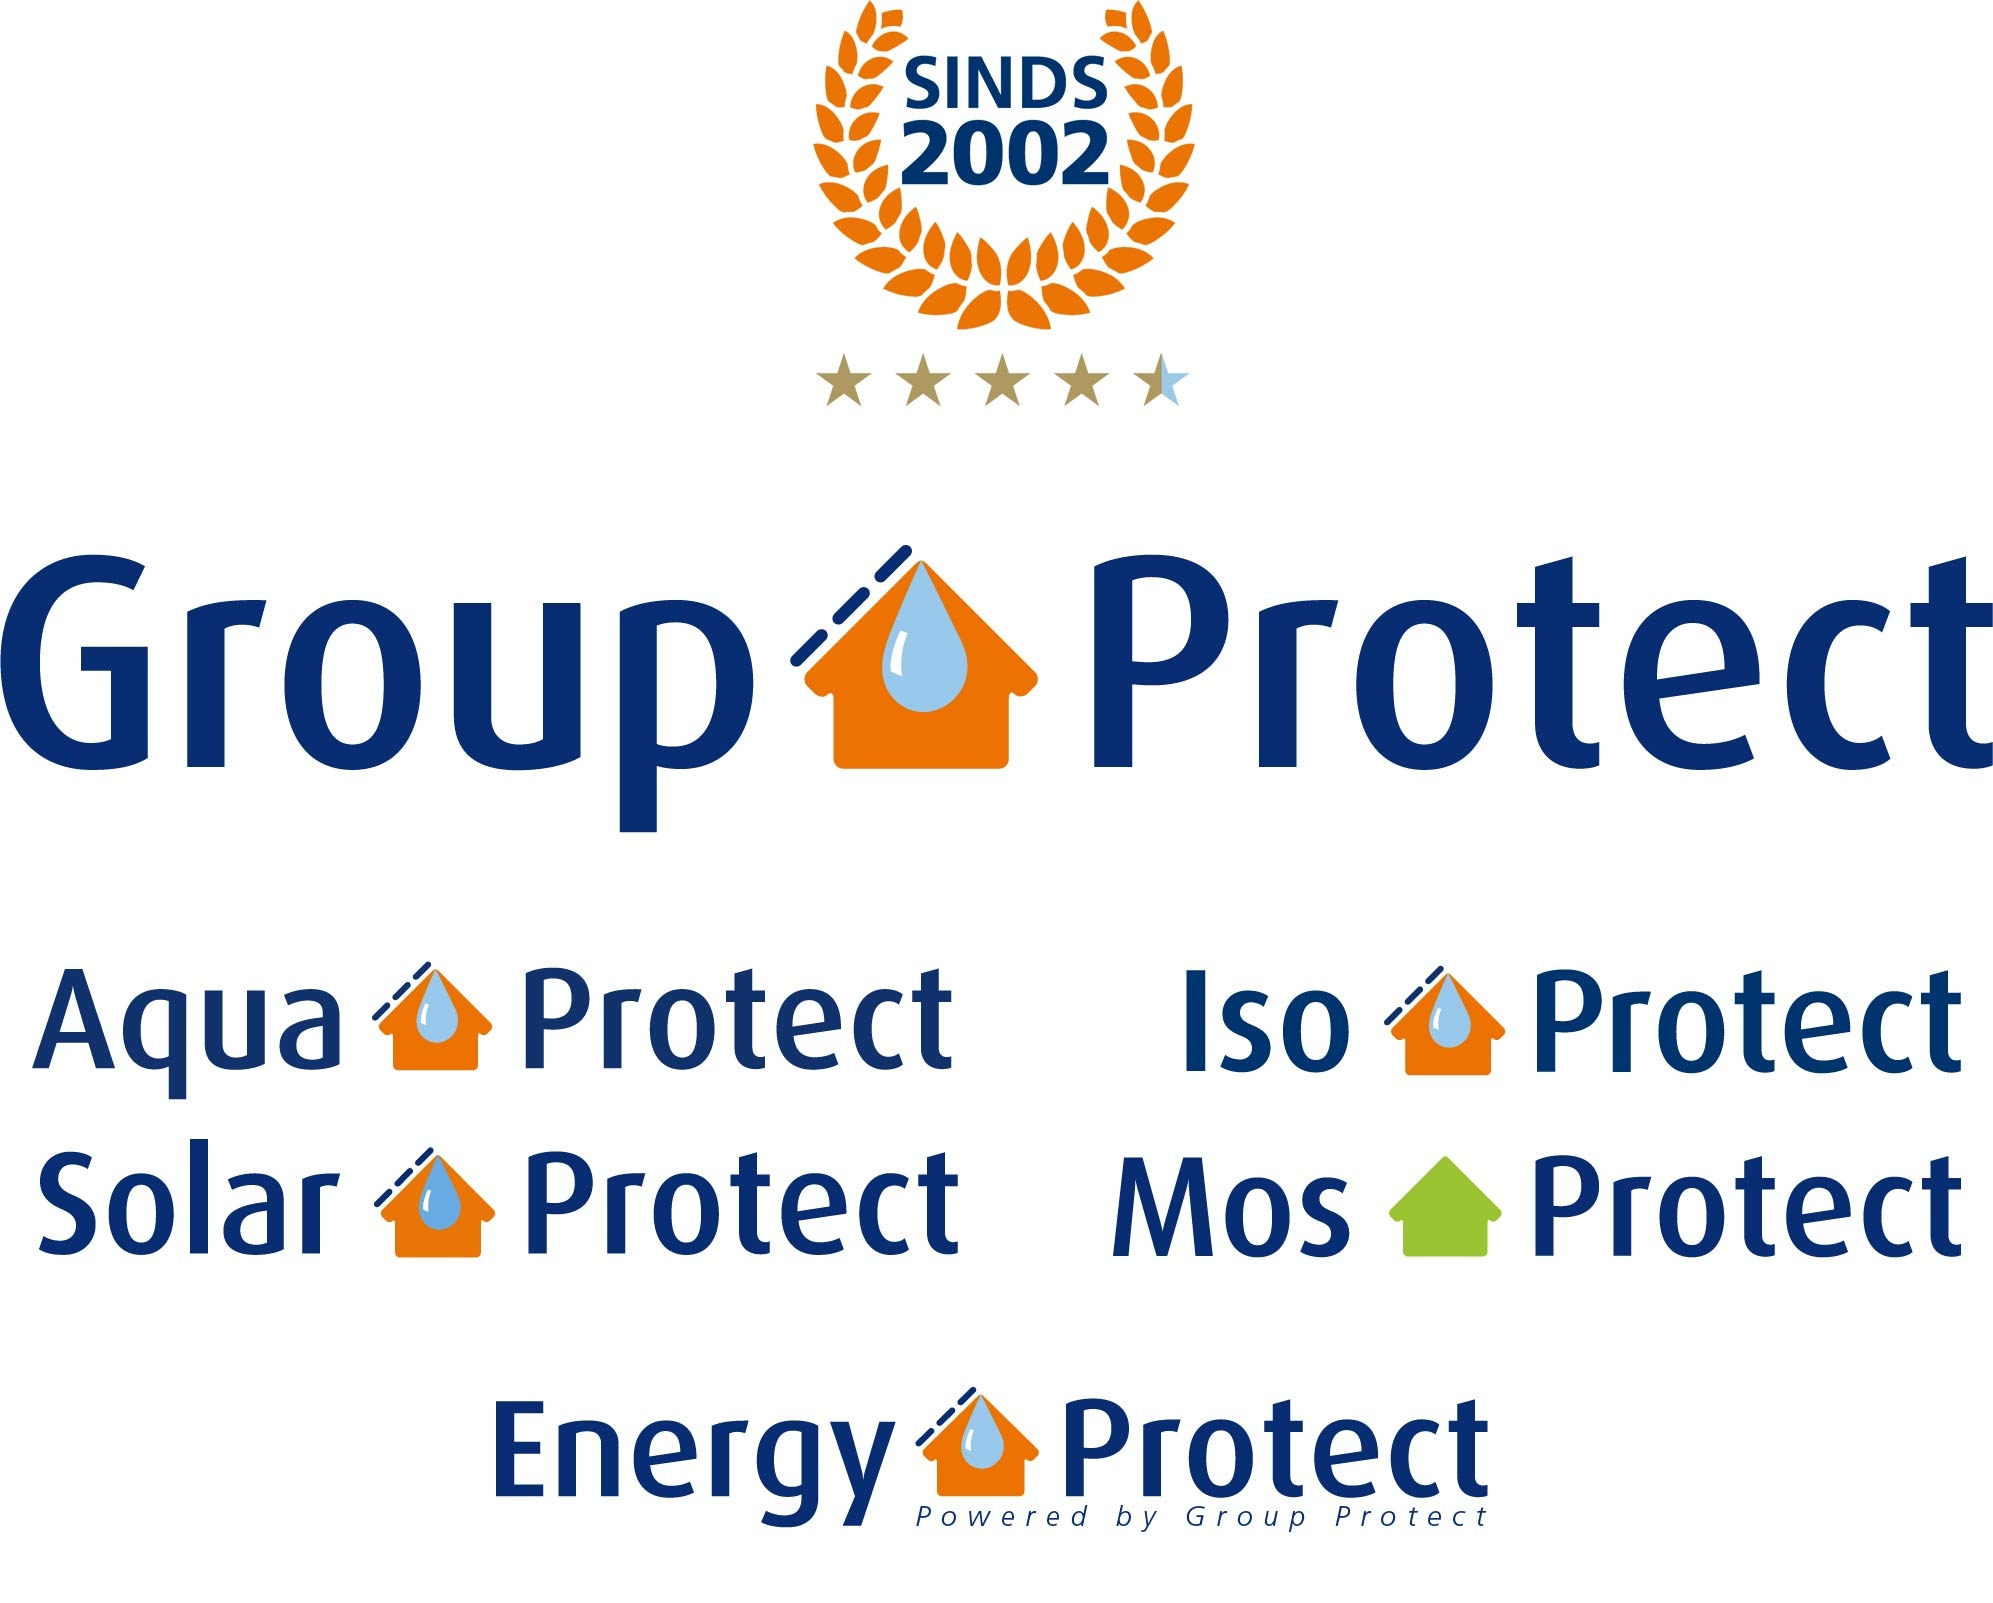 Solar Protect - over ons